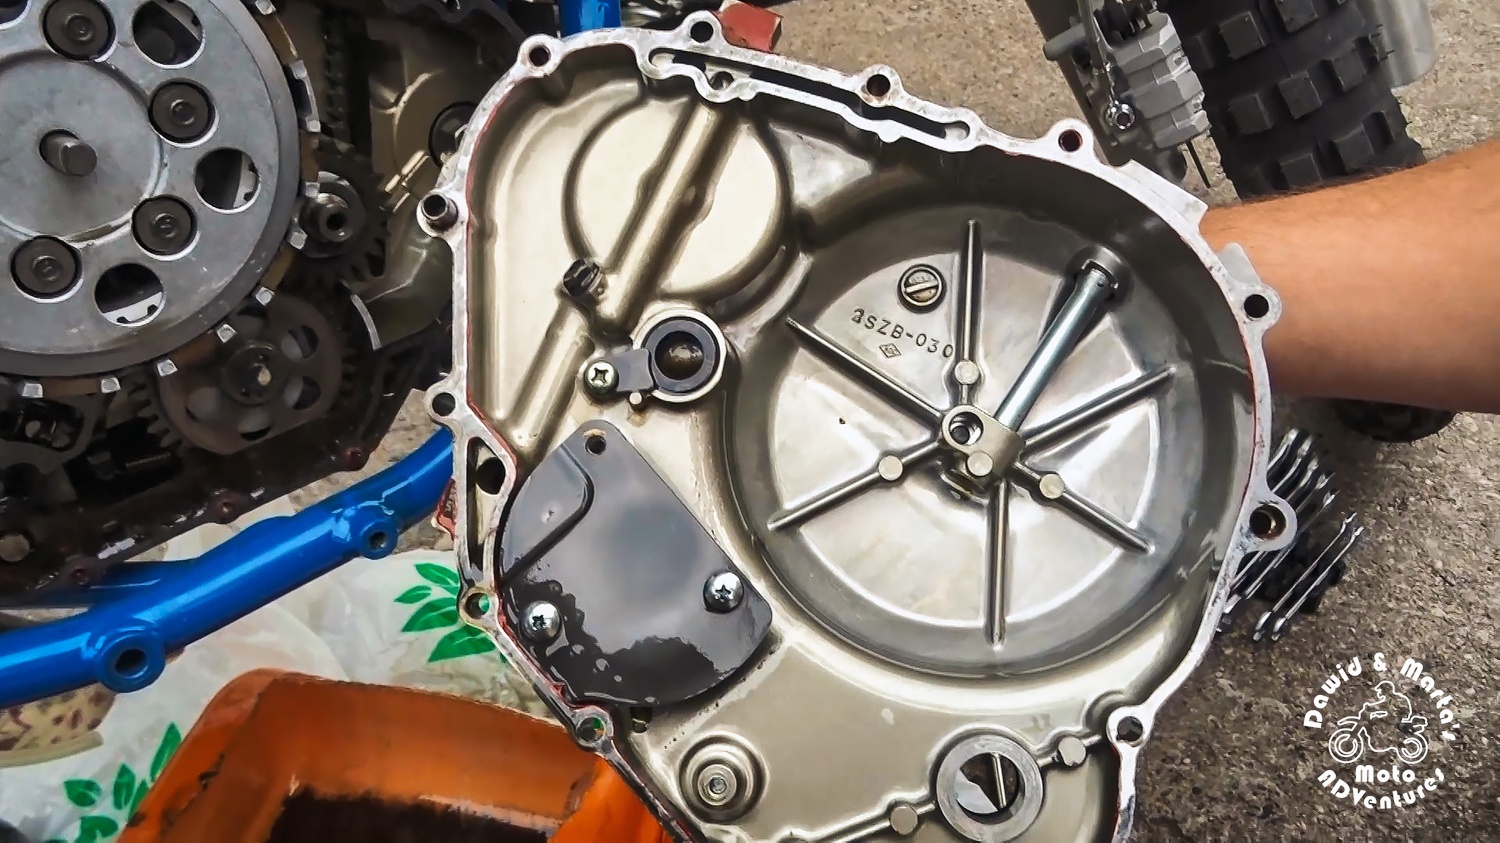 DR350S clutch cover